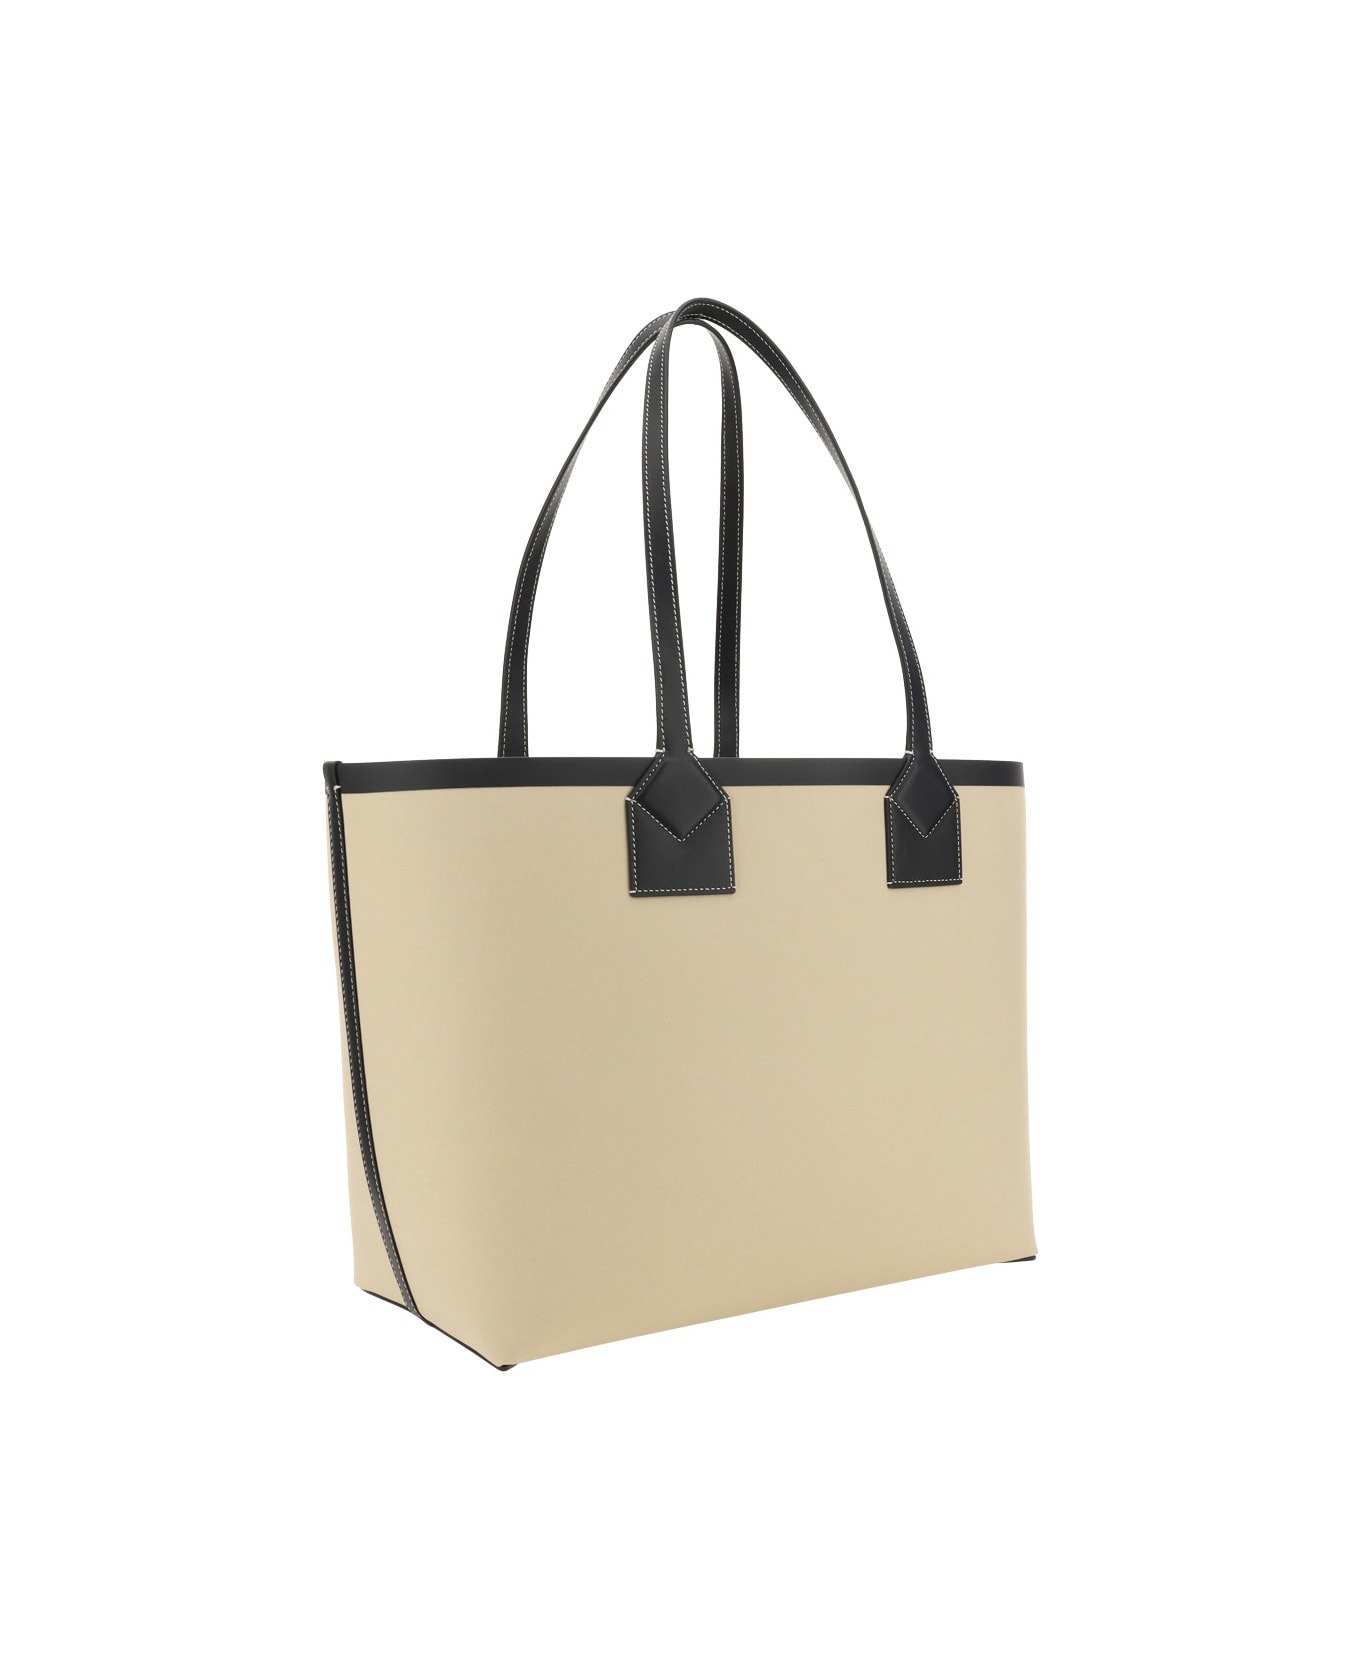 Burberry Heritage Shopping Bag - Beige トートバッグ